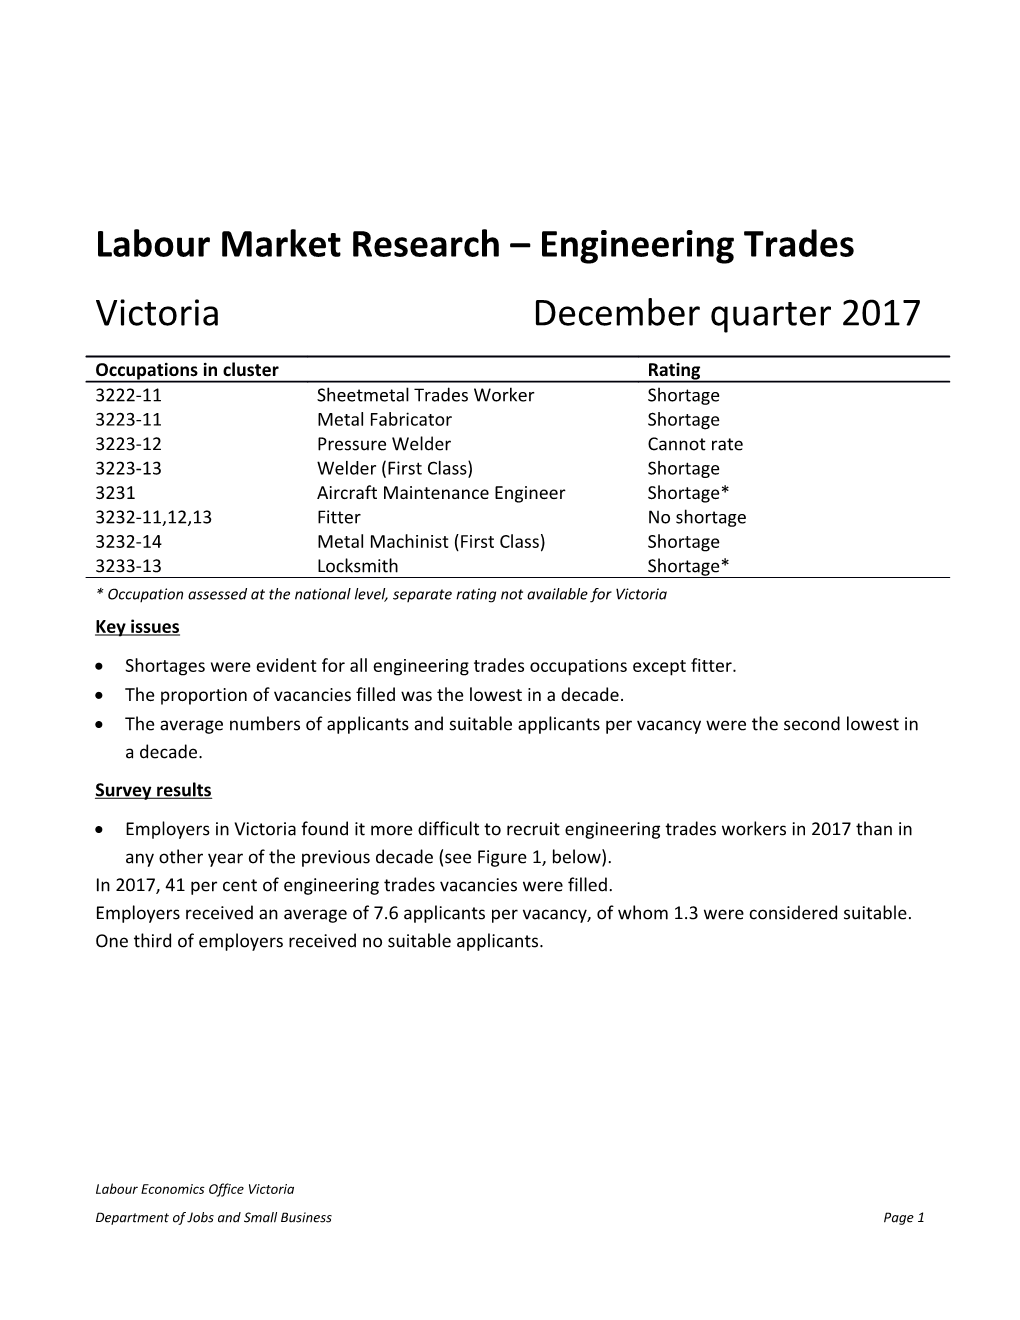 Labour Market Research Engineering Trades